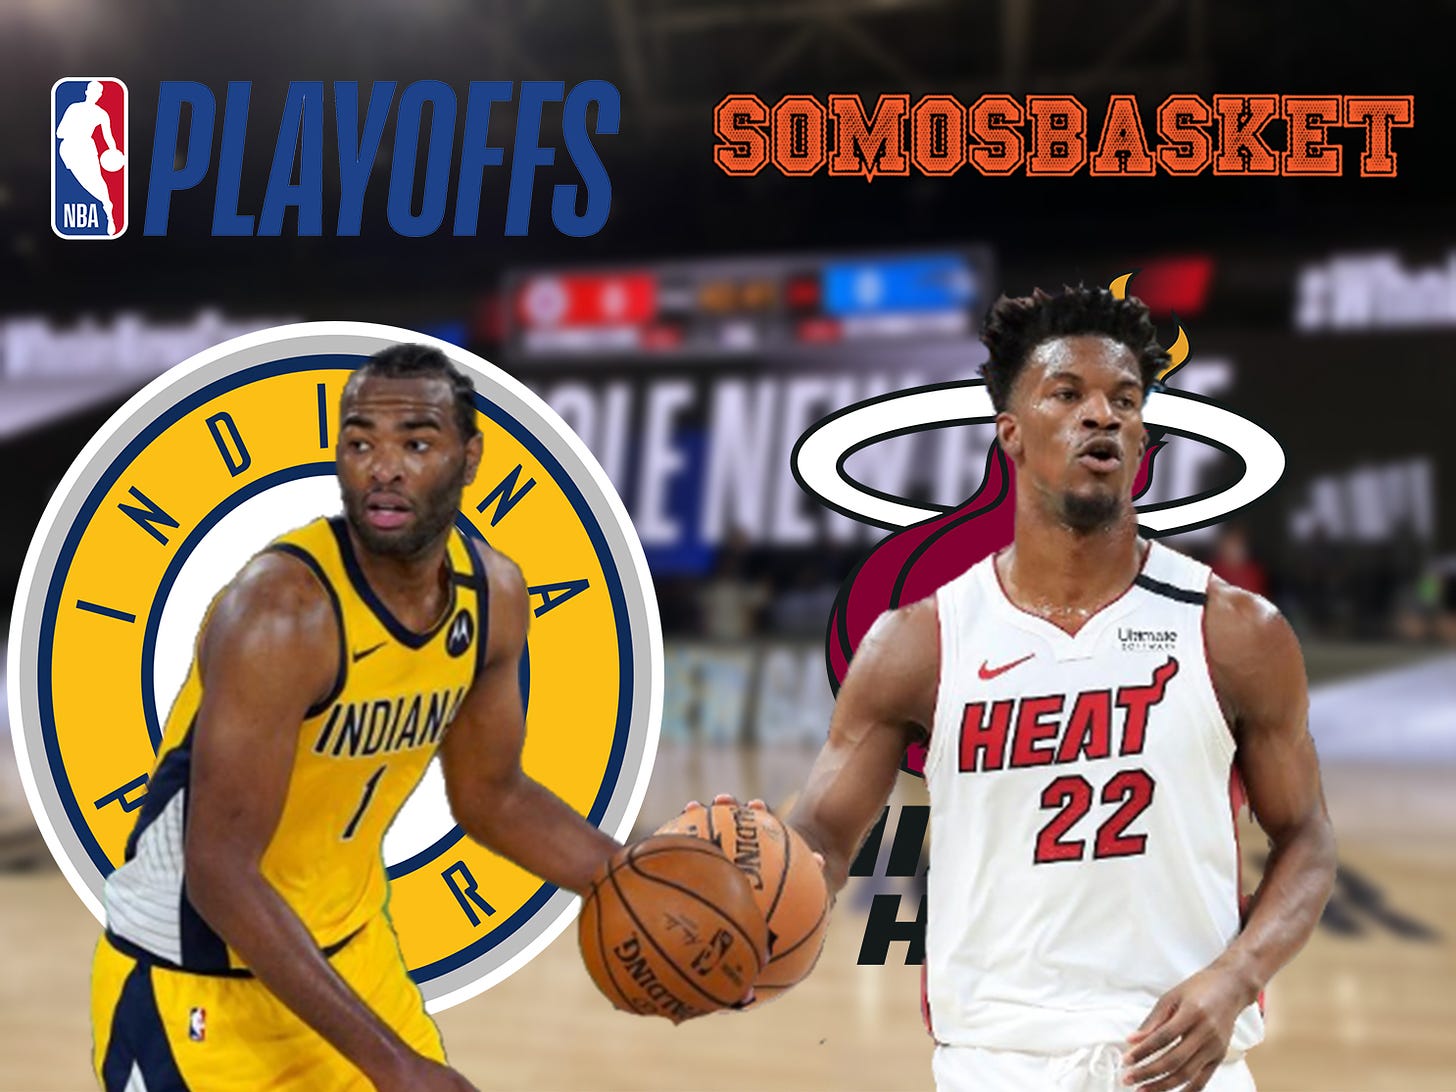 PREVIA Playoffs 2019-20 | Indiana Pacers vs Miami Heat